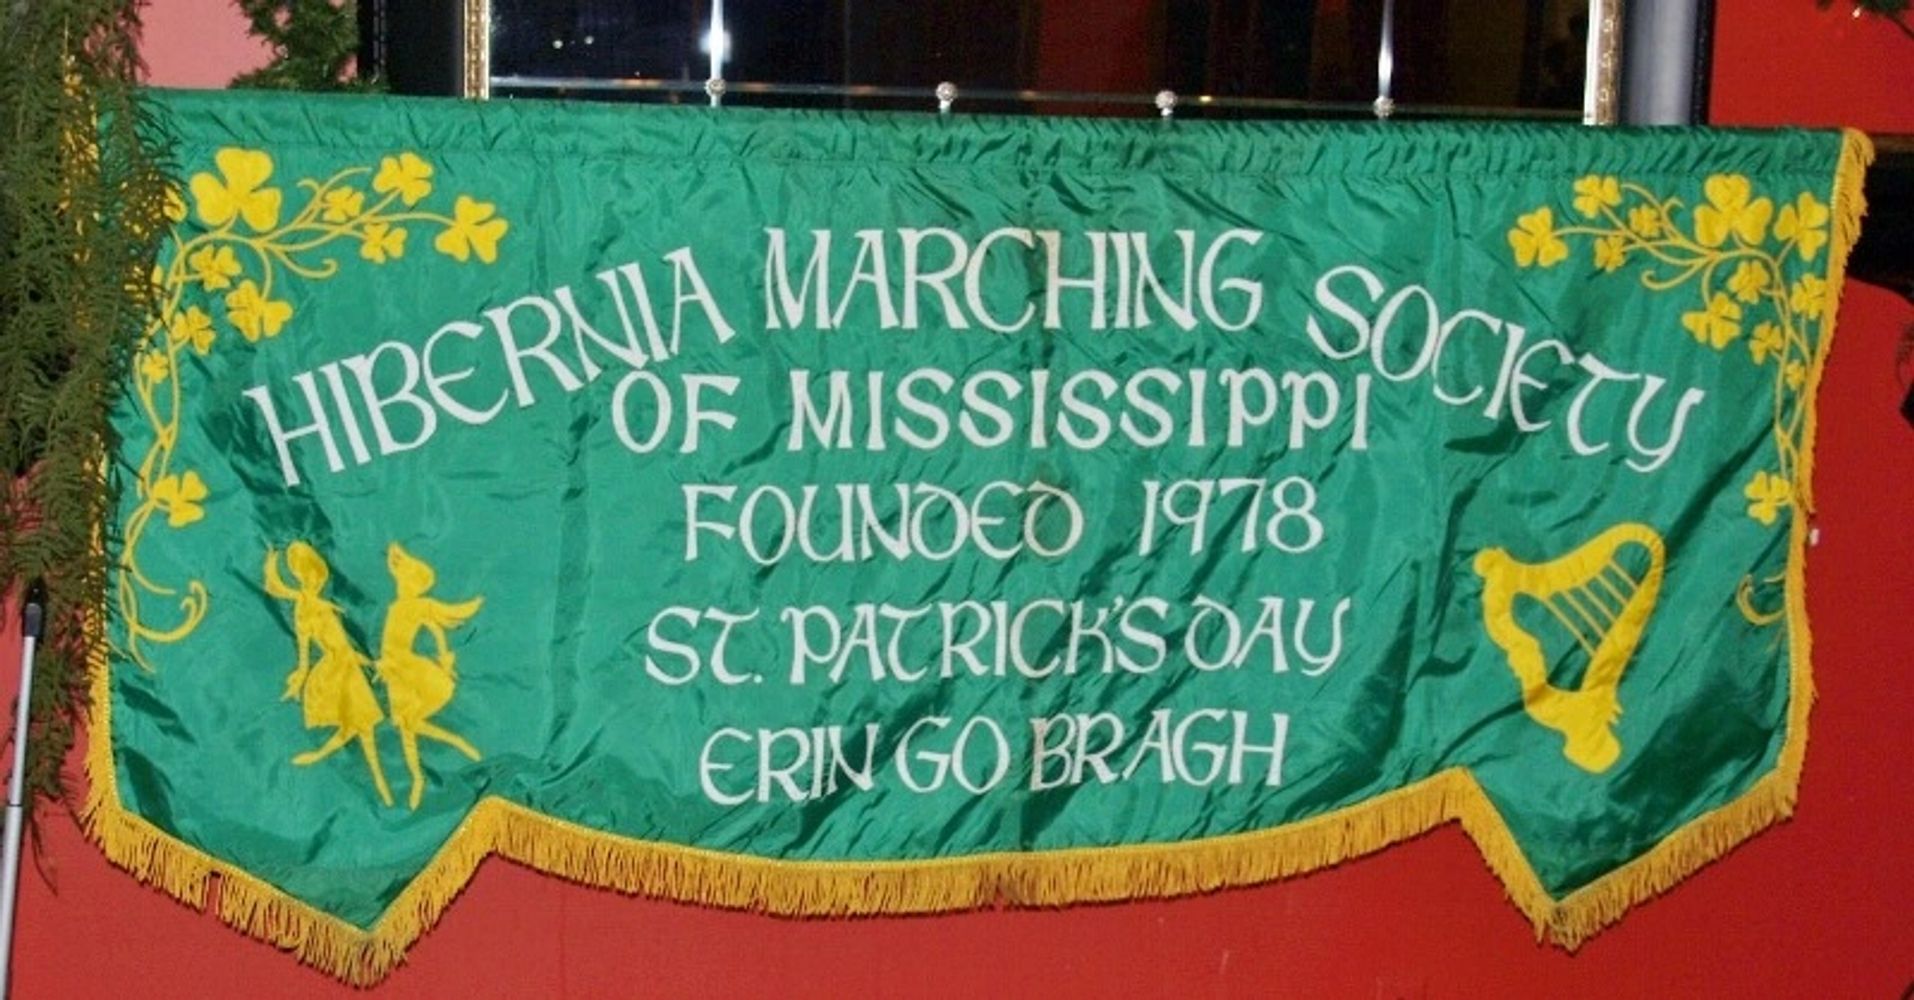 Hibernia Marching Society of Mississippi Banner